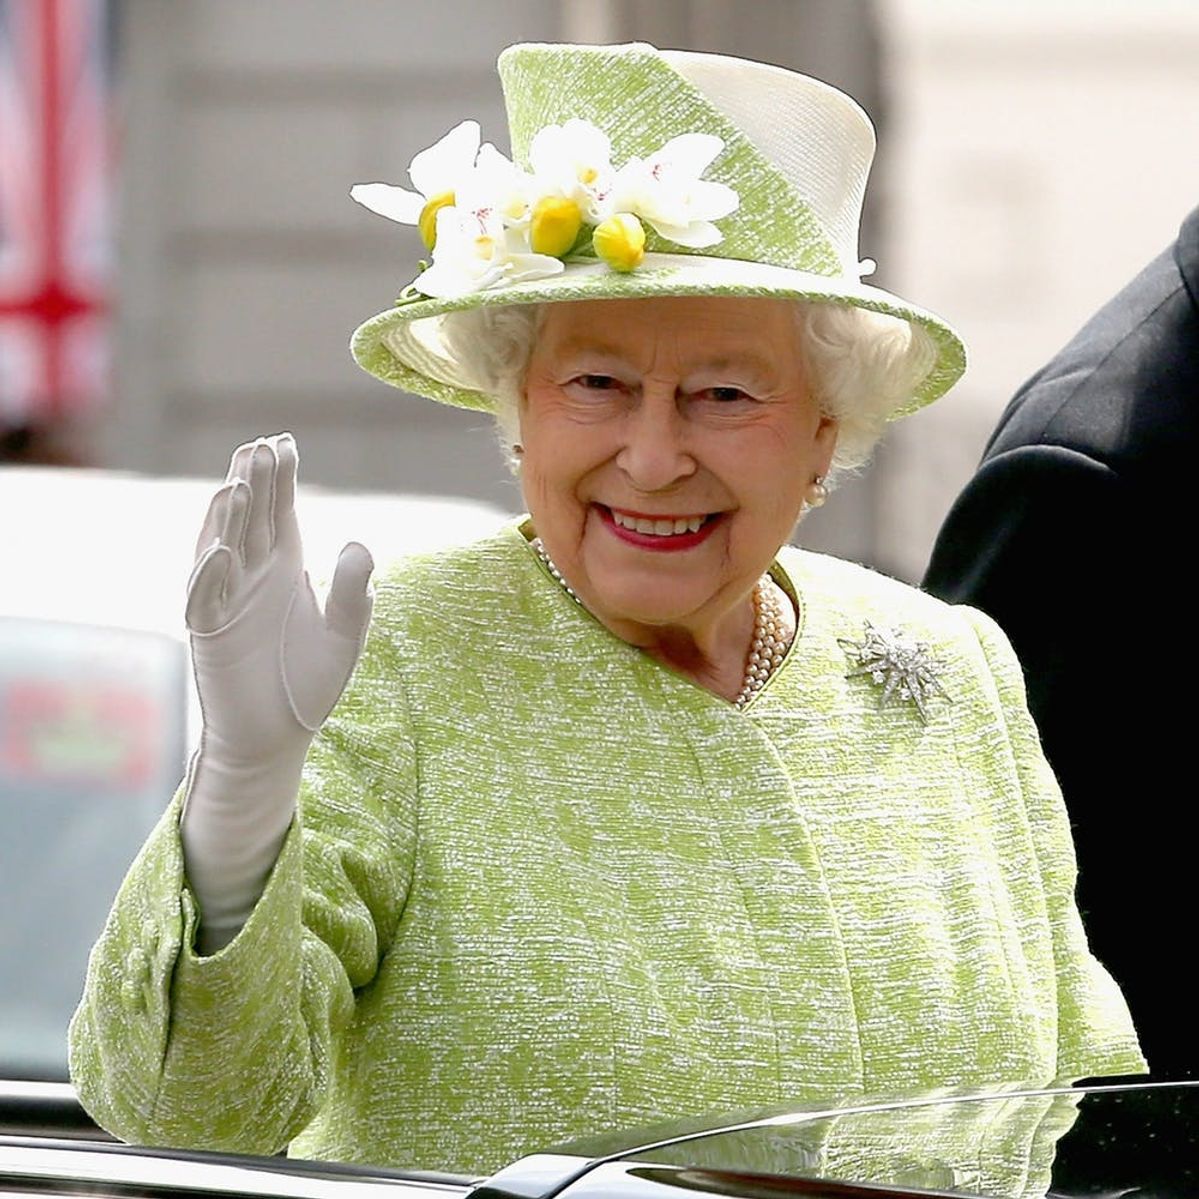 The Queen Just Threw Shade at the Obamas in the Most Epic Way Possible